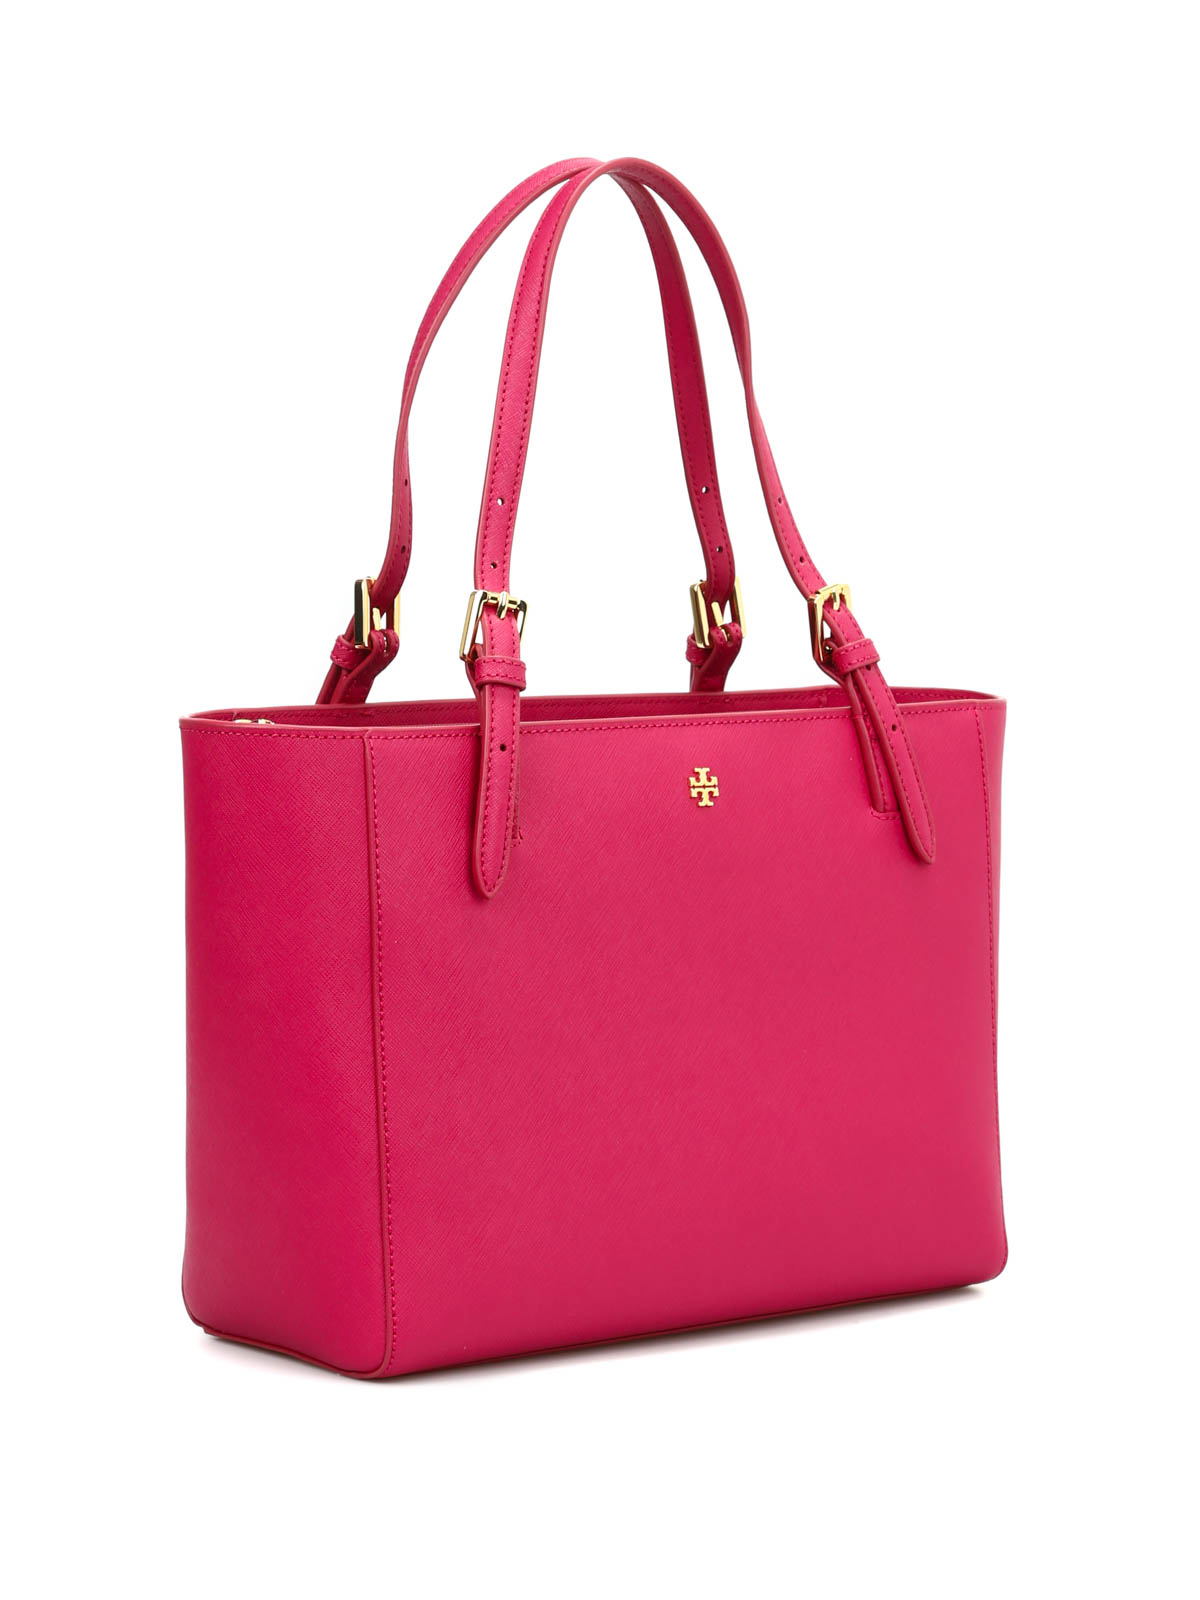 Tory Burch, Bags, Tory Burch Saffiano Tote Hand Bag Red